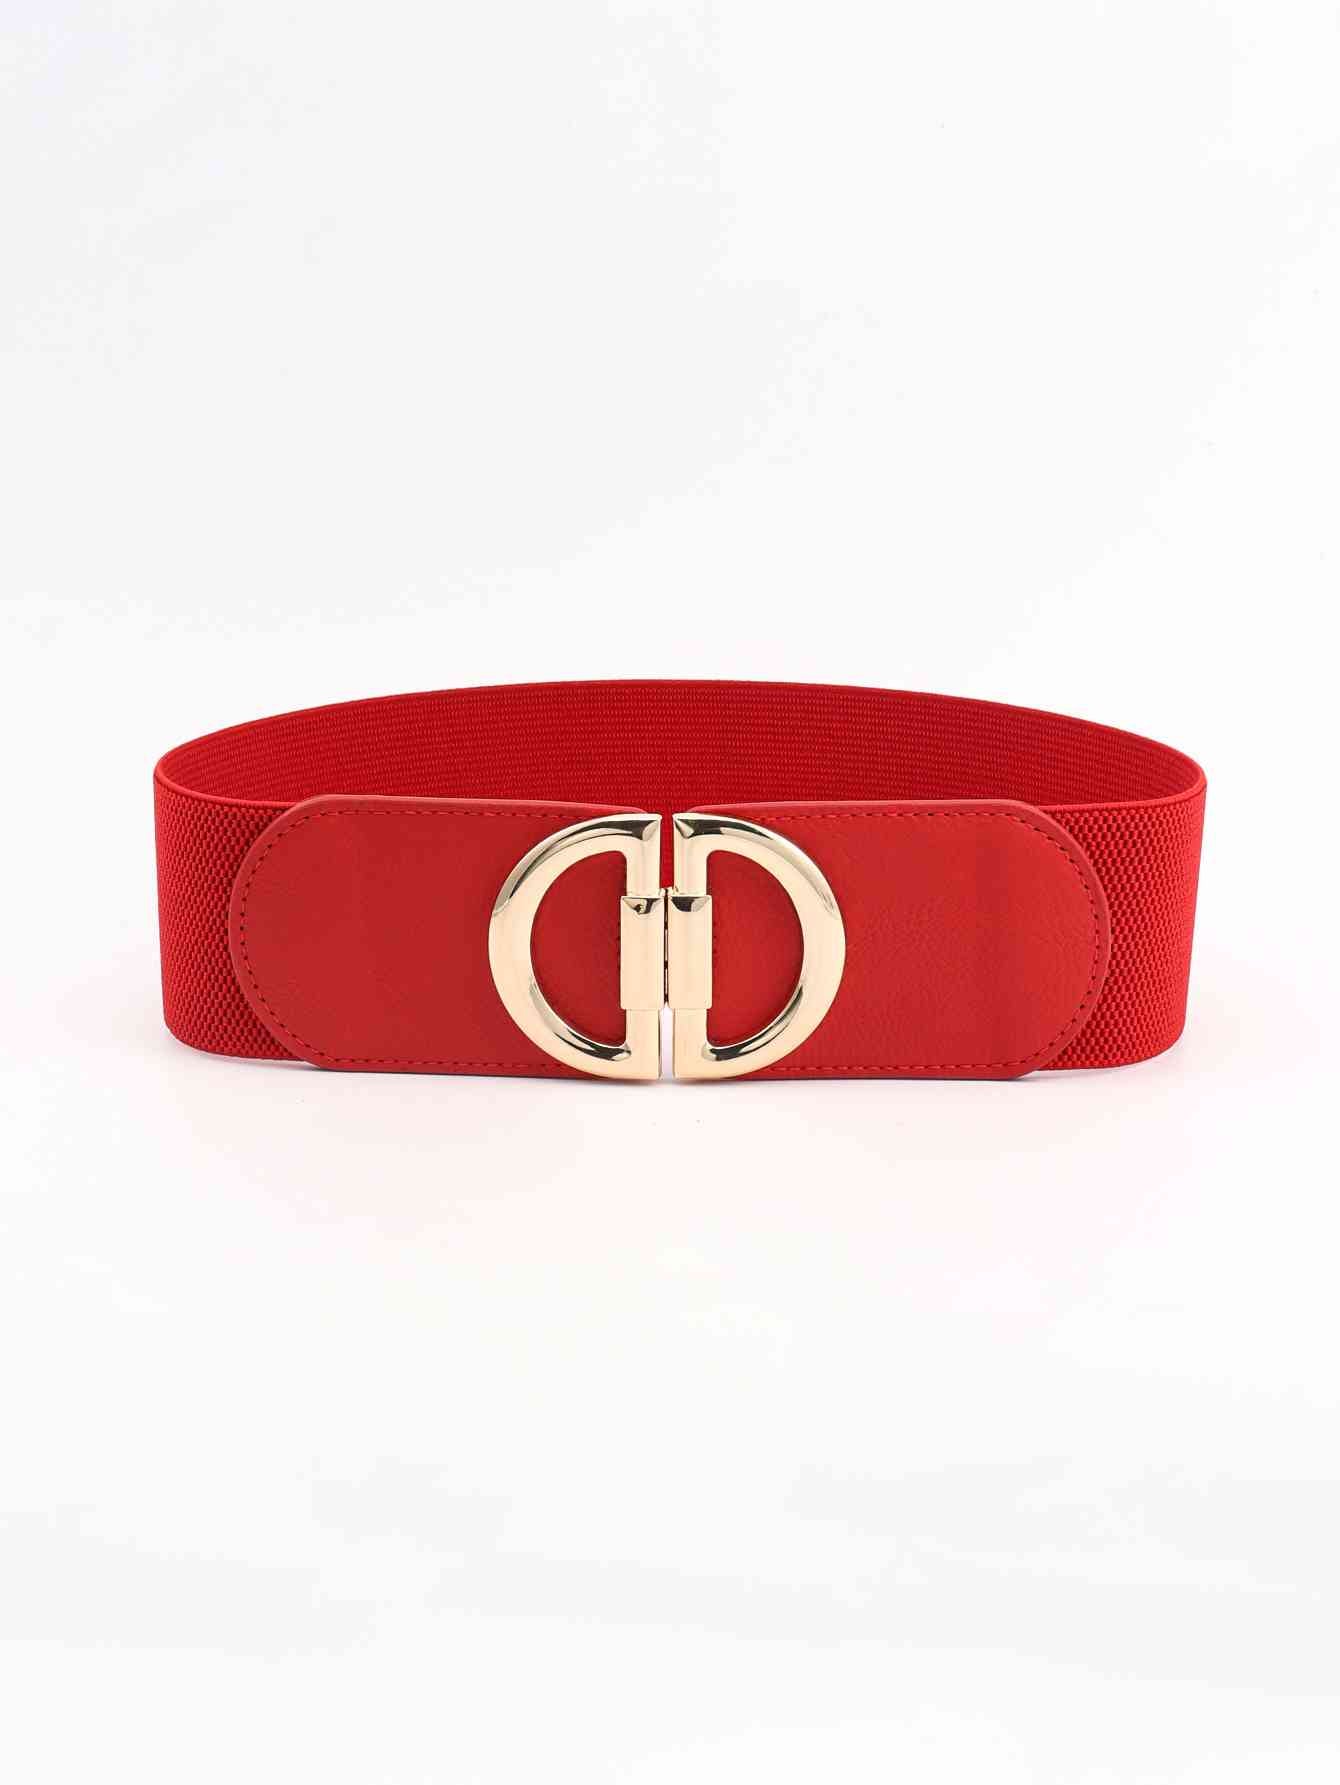 D Buckle Elastic Belt Red One Size